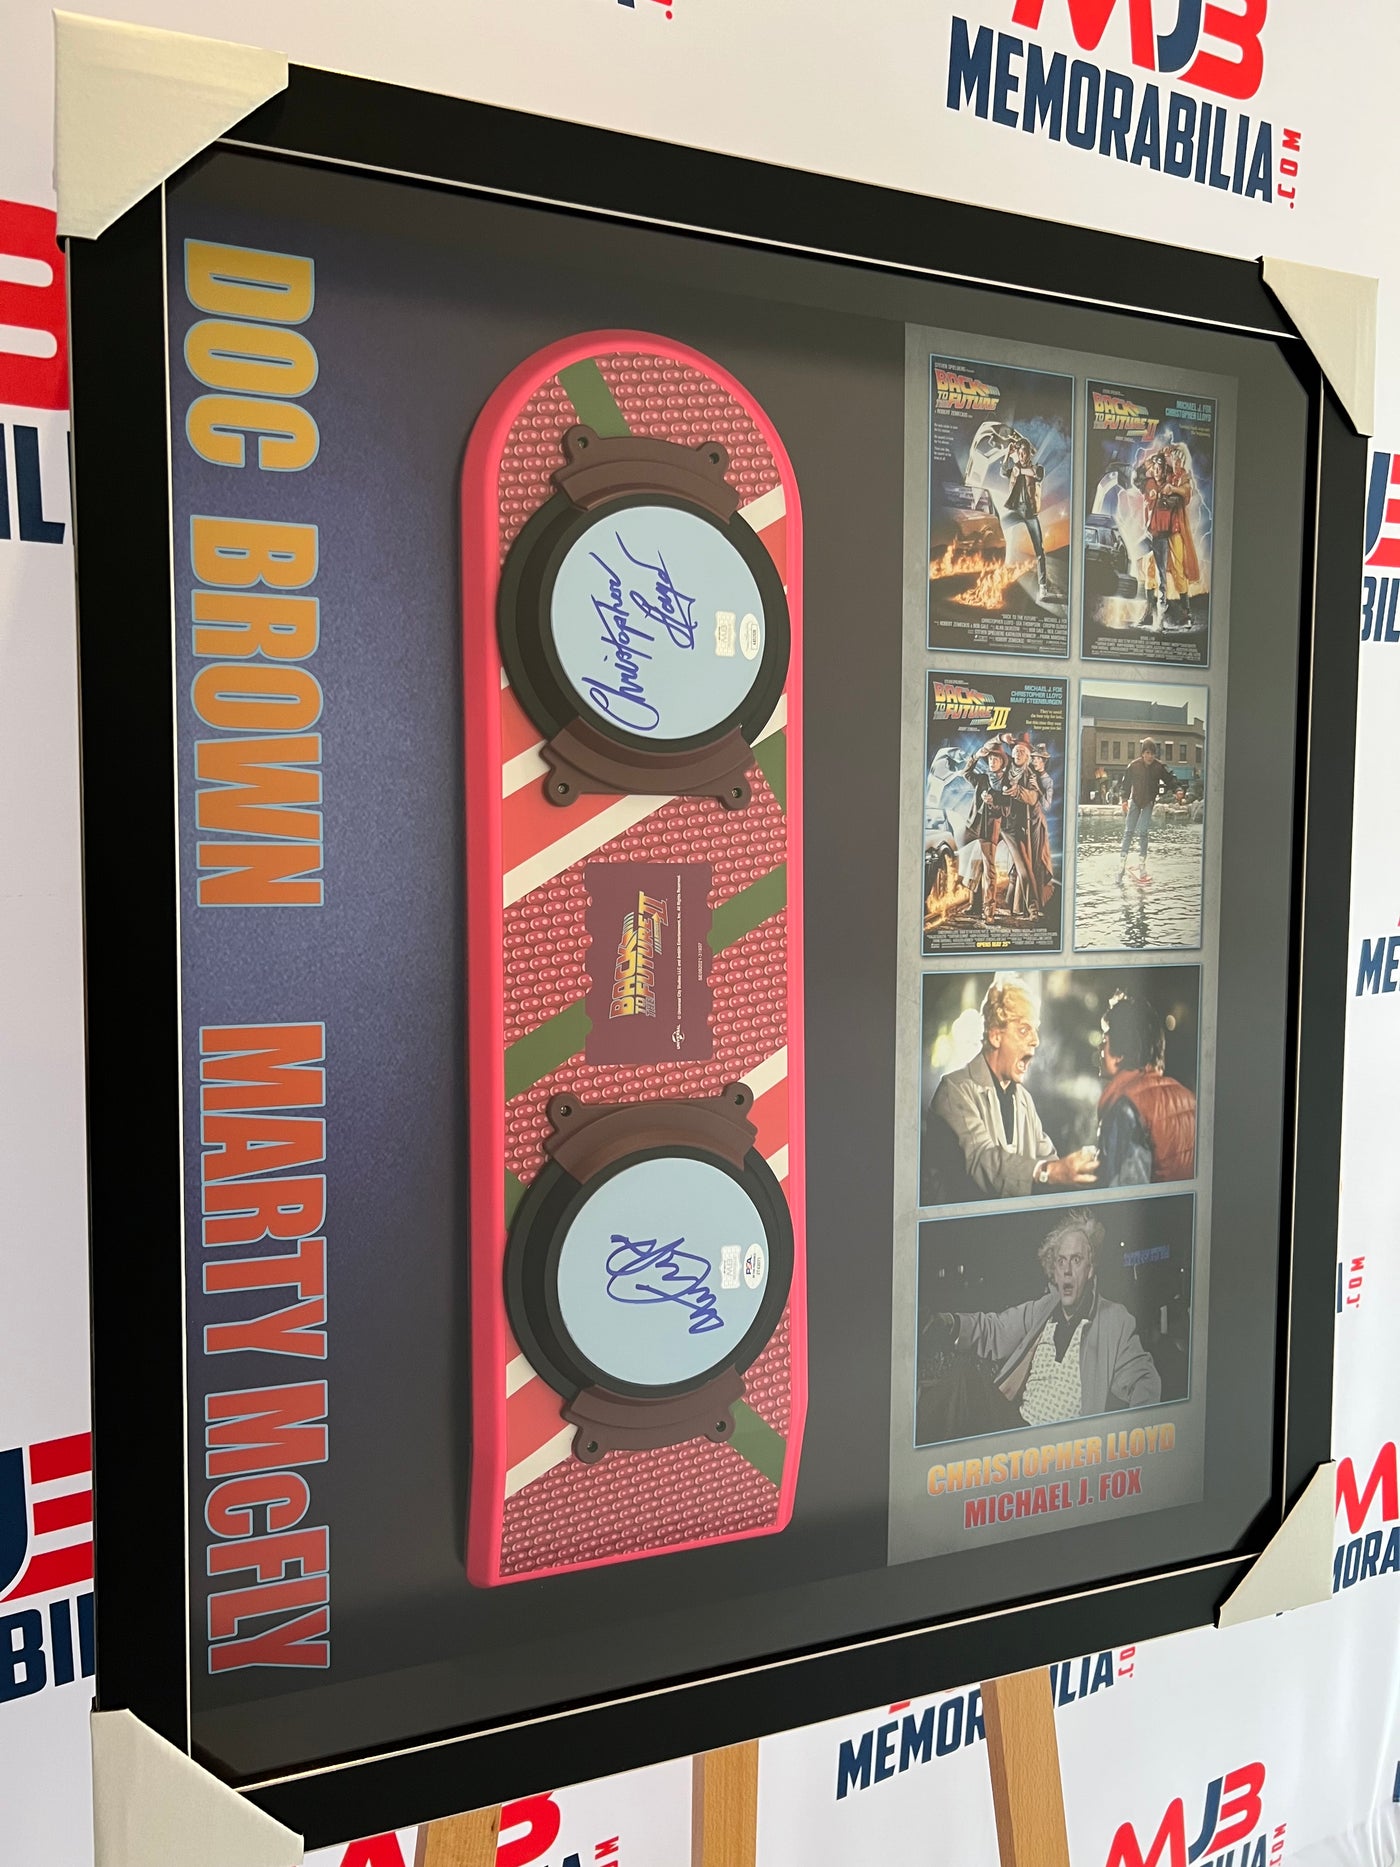 Michael J Fox Christopher Lloyd Dual Signed Hoverboard framed with Authentication